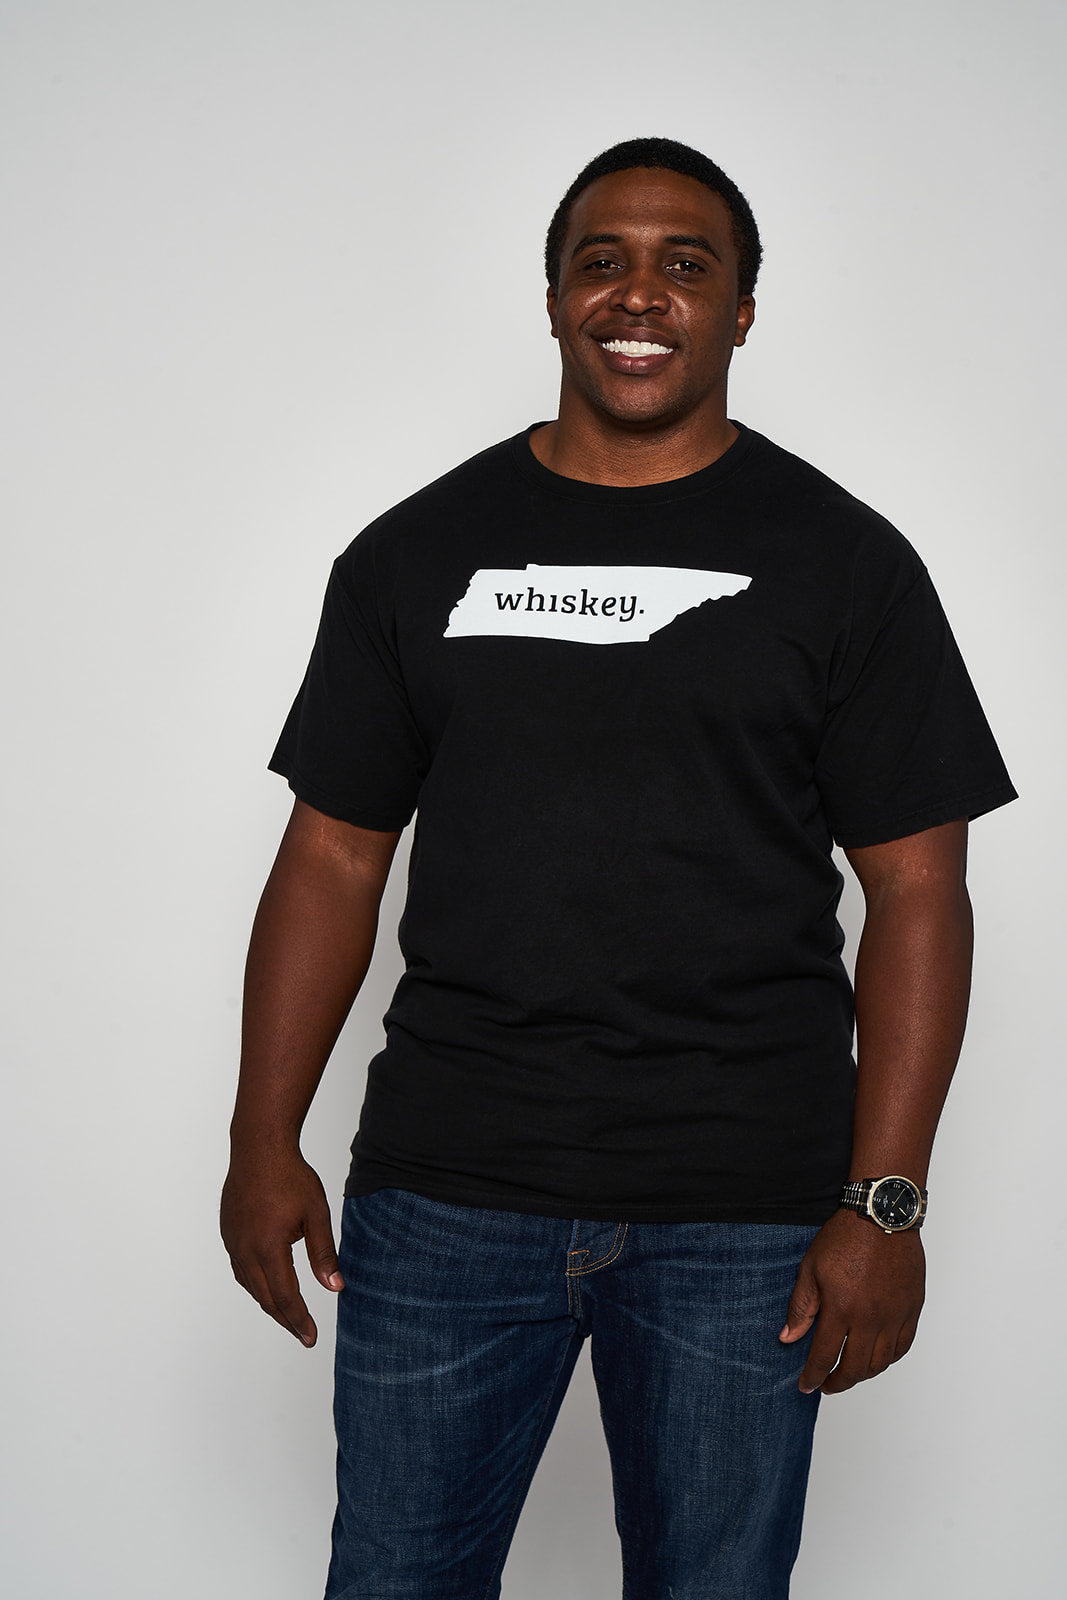 State of Whiskey Tee Short Sleeve